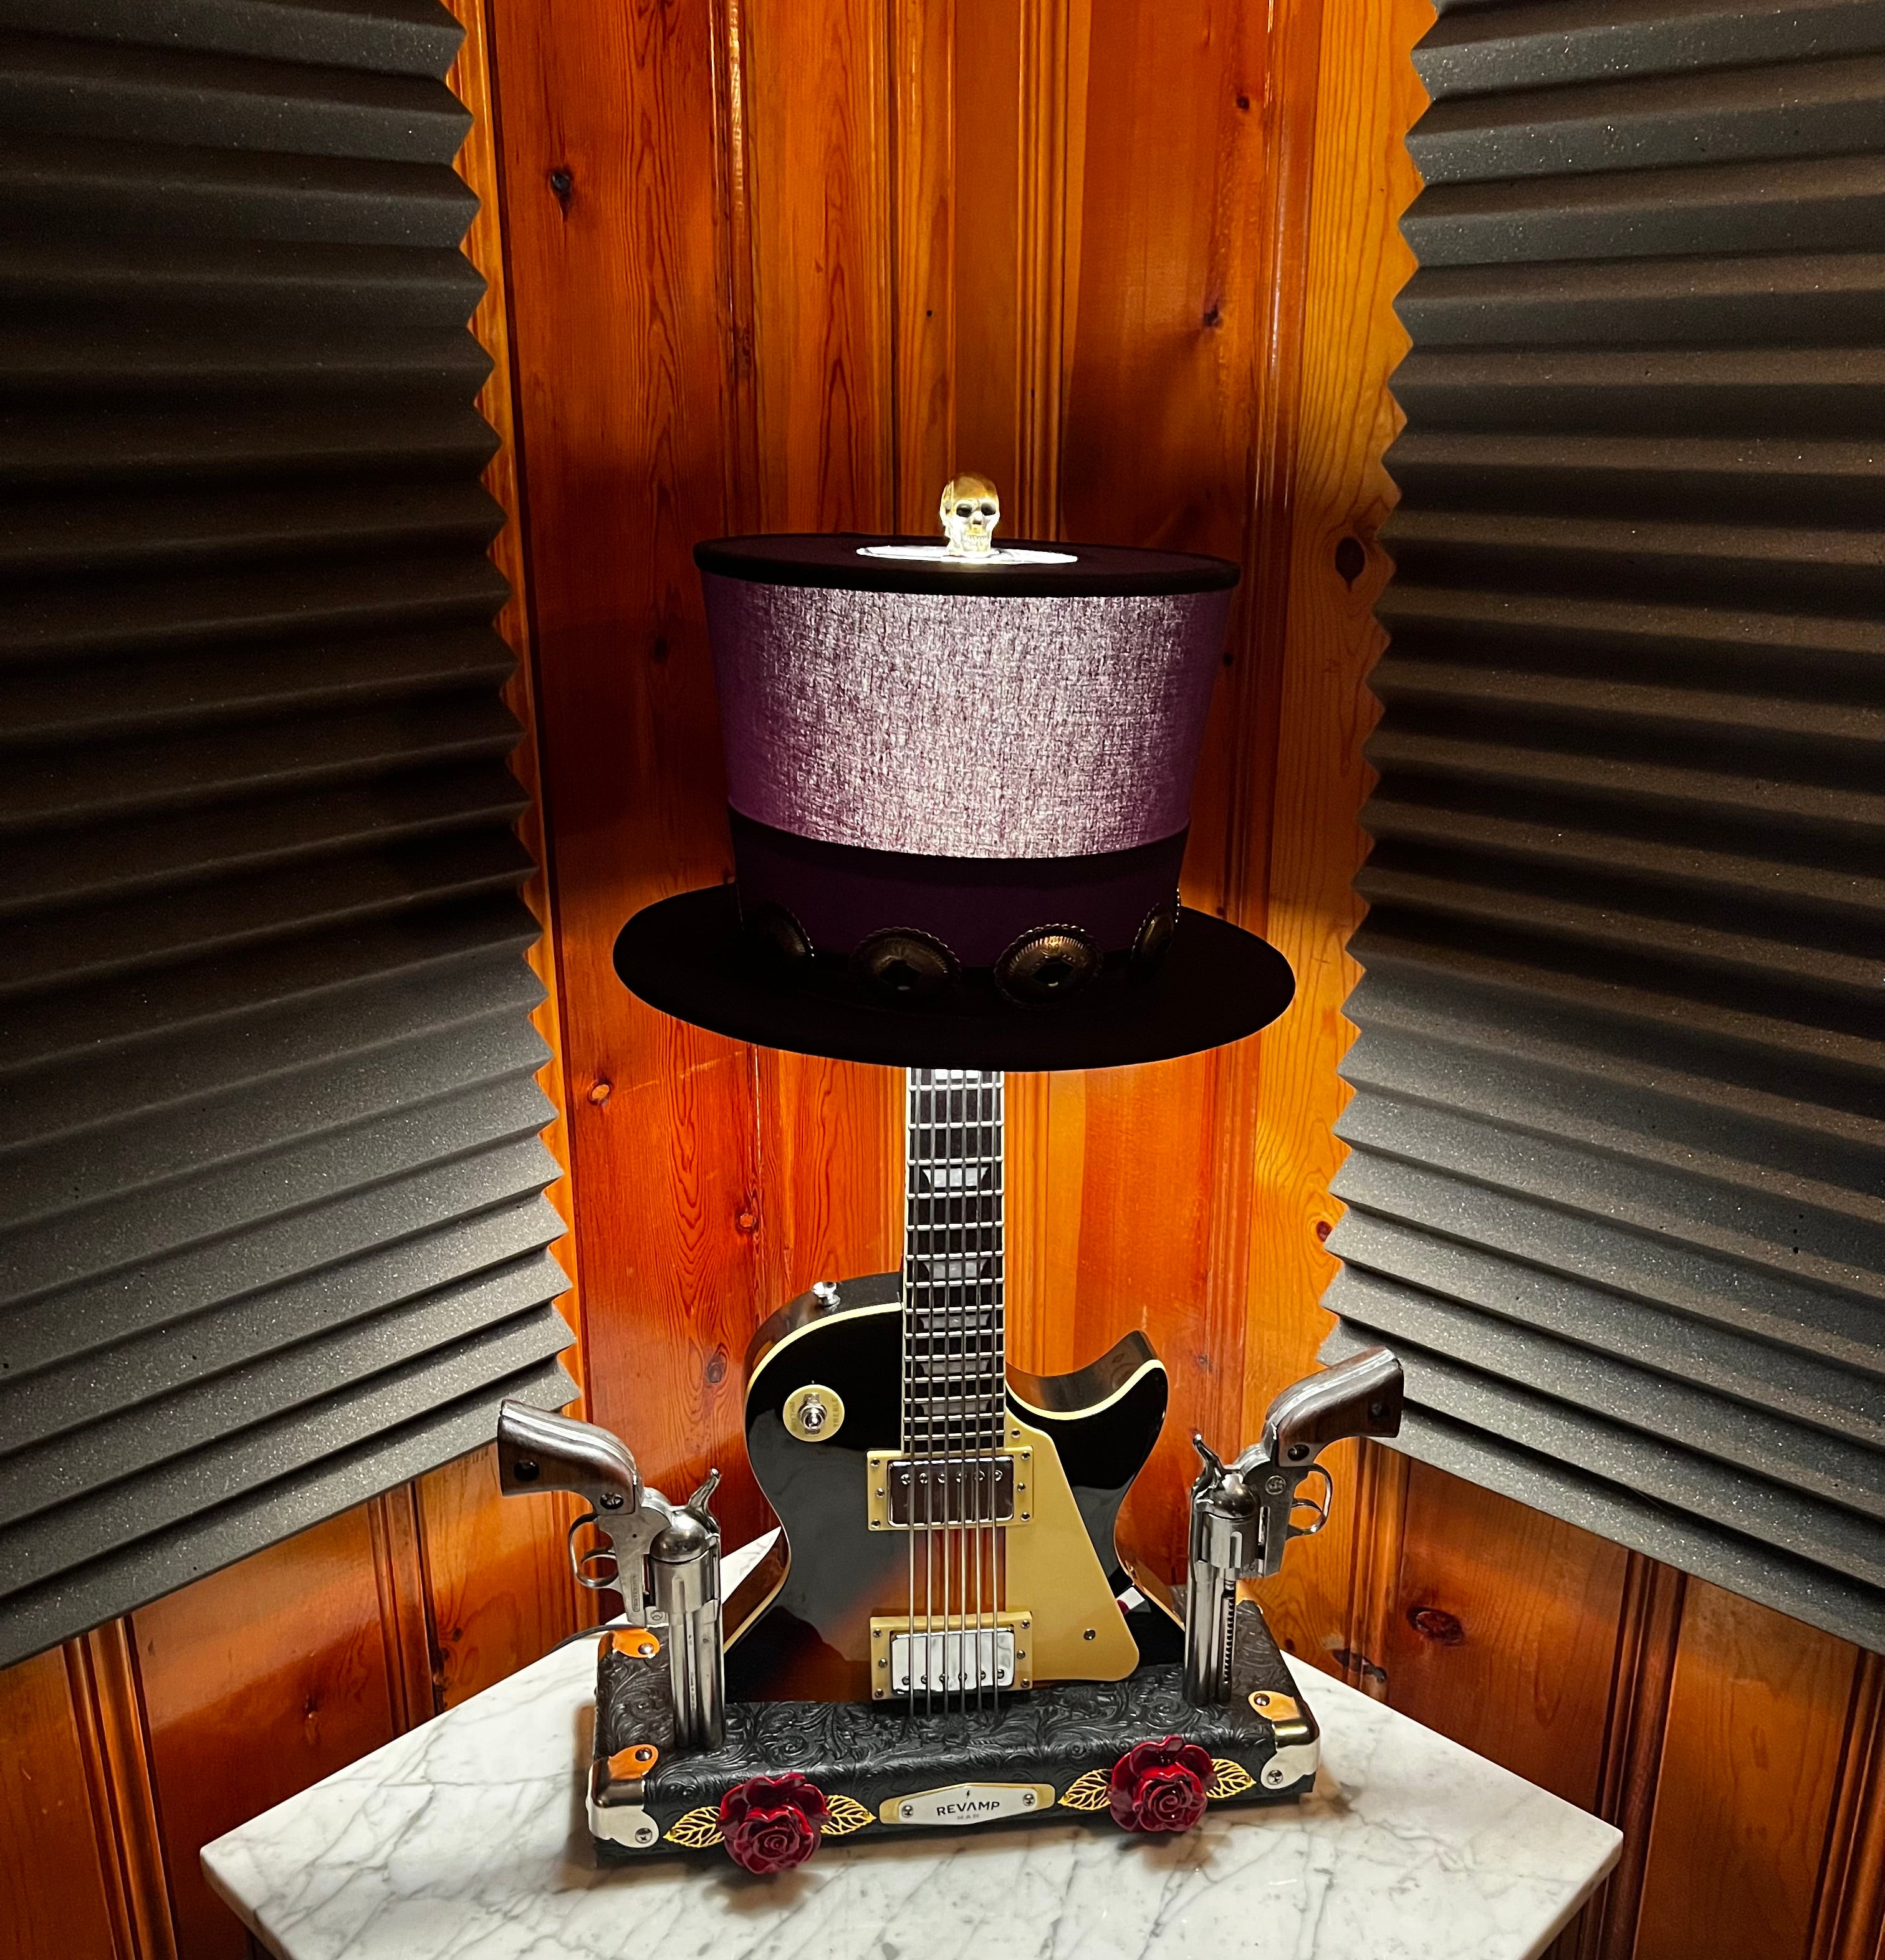 Guitar Lamp-The Slasher #085 of Collection